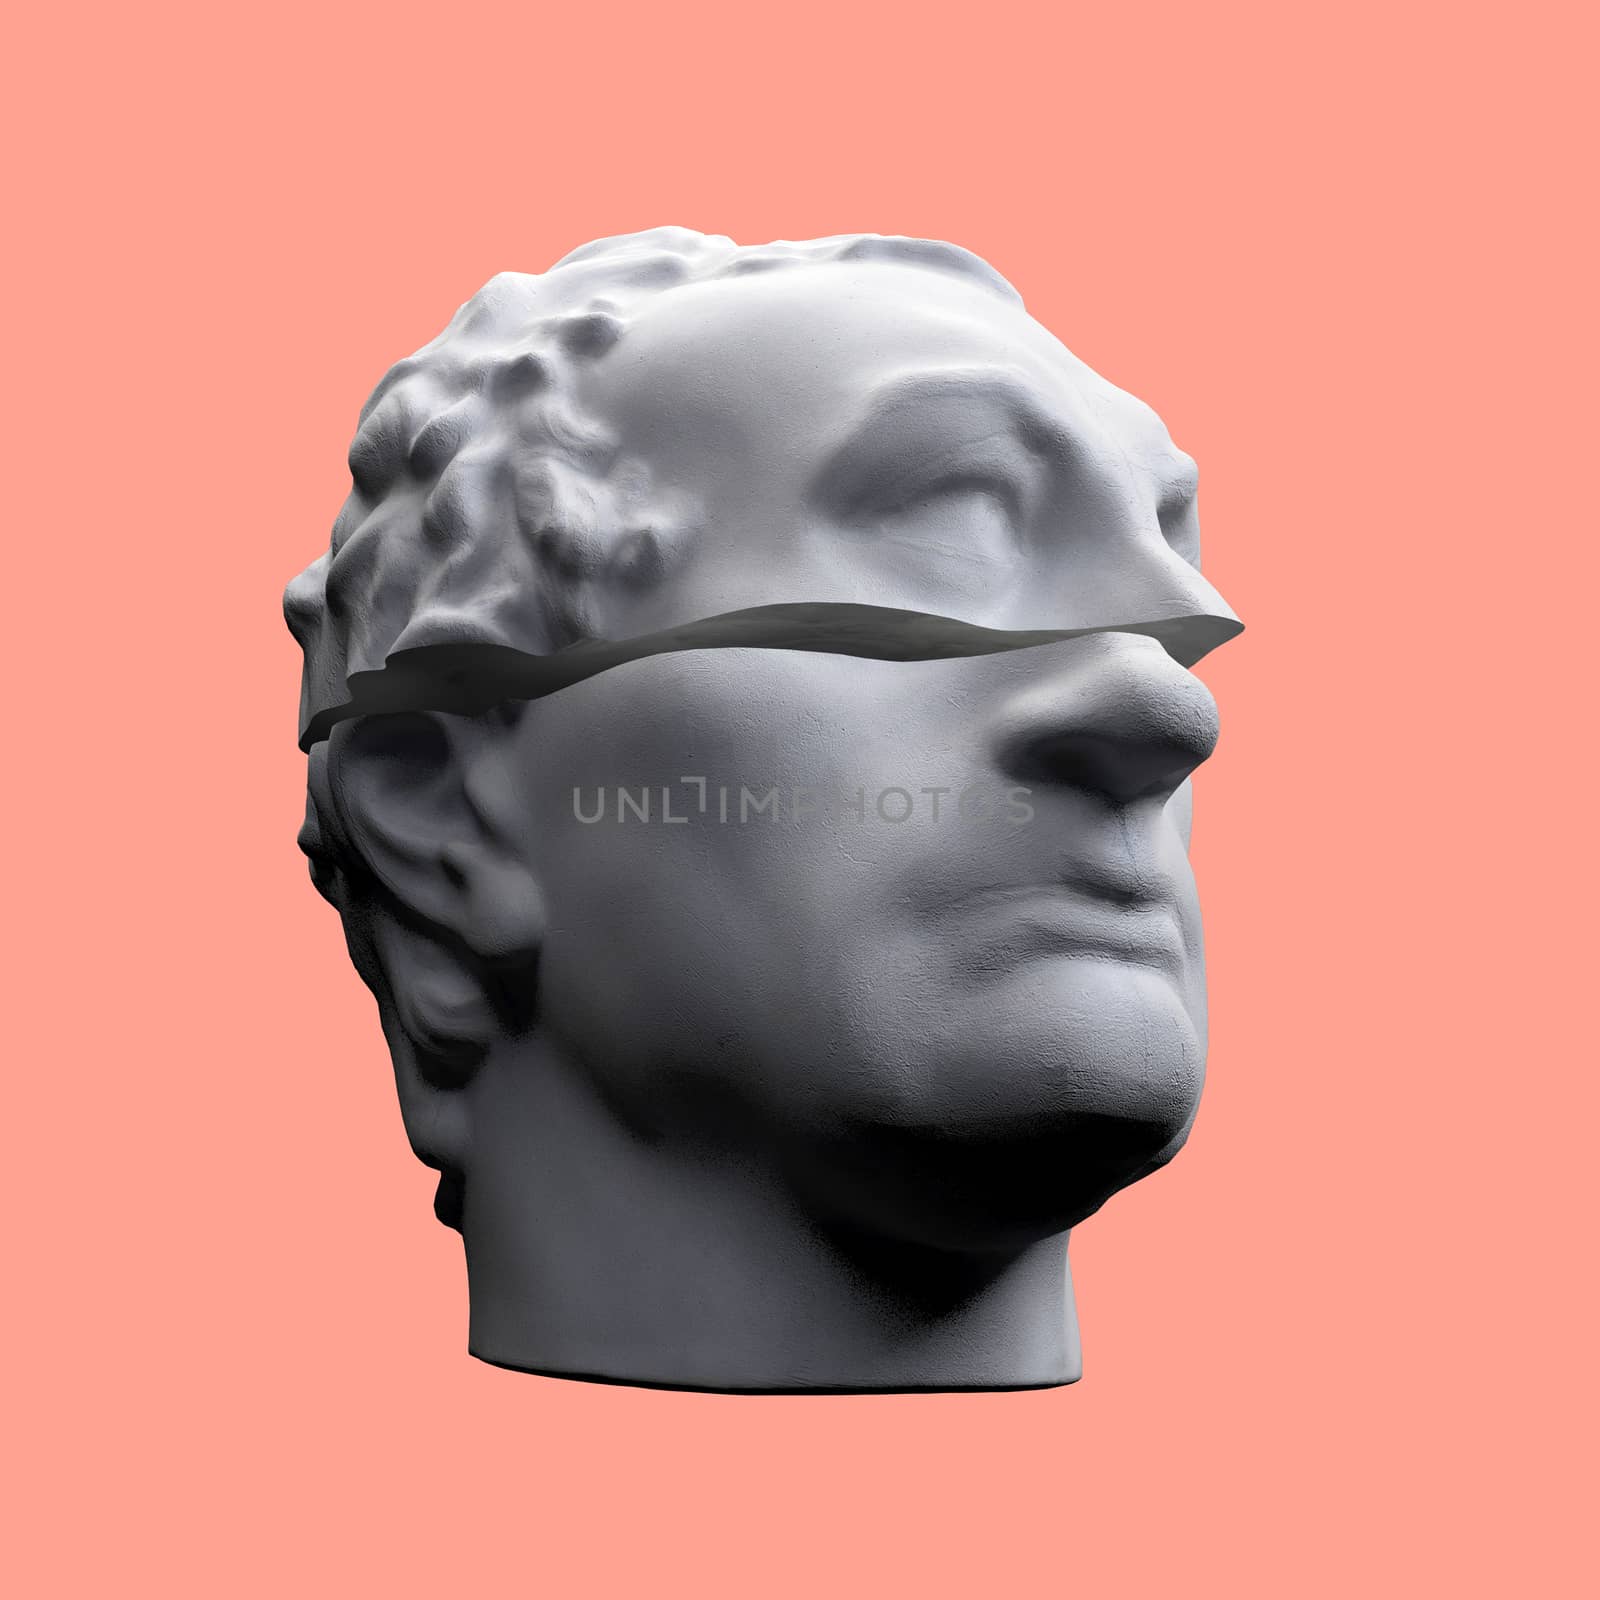 Abstract digital illustration from 3D rendering of Gattamelata bust sliced in two